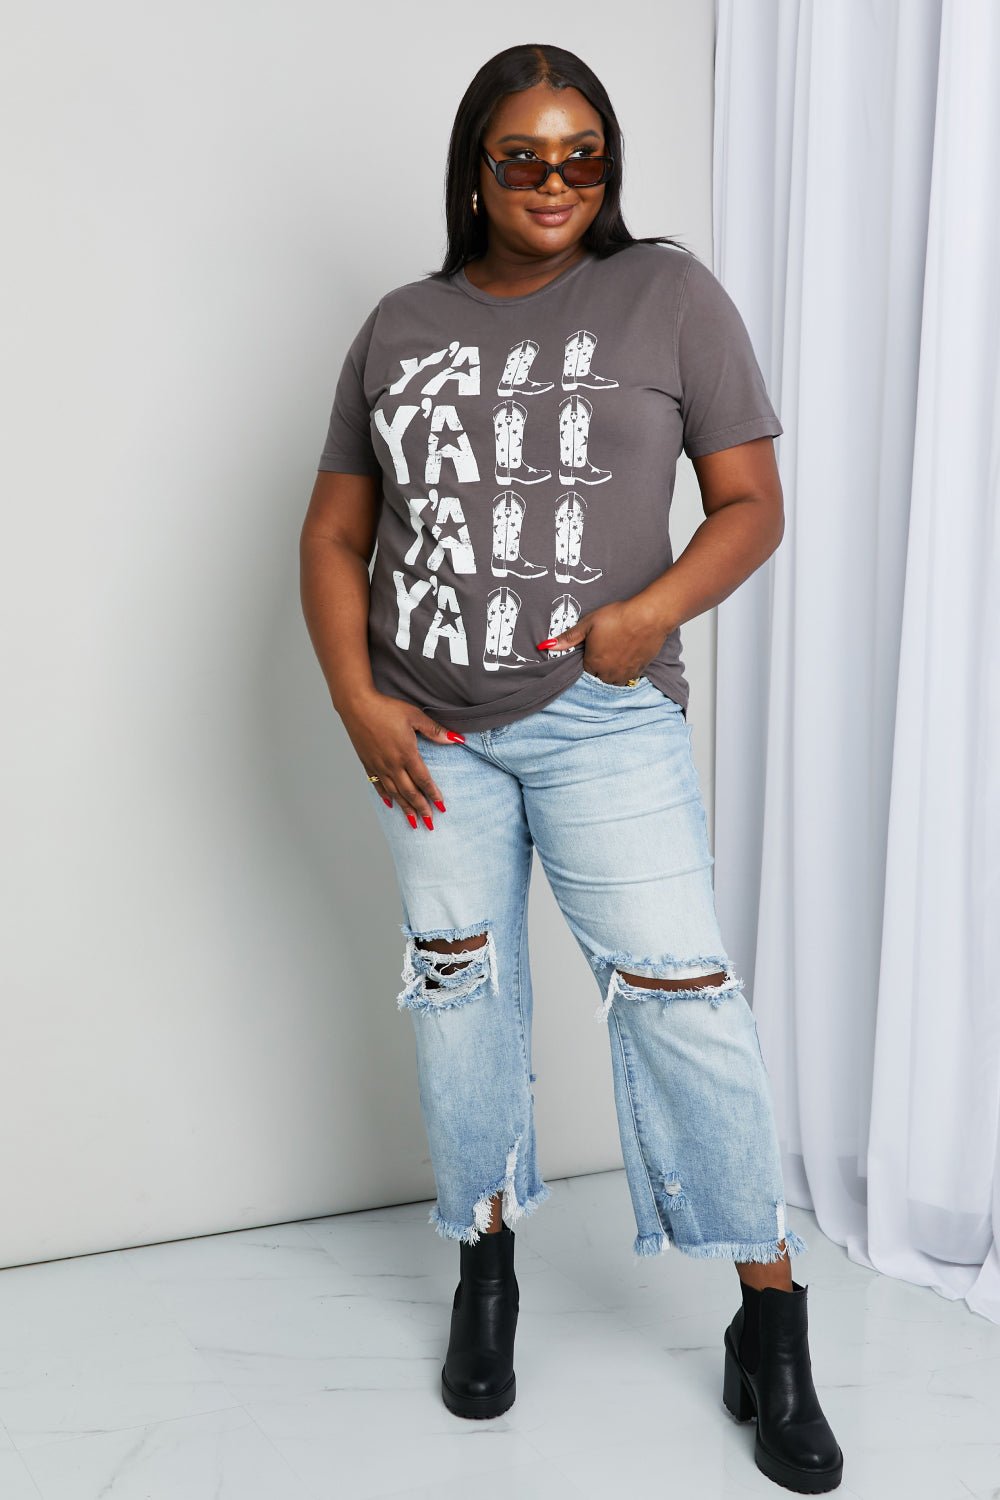 Y'ALL Cowboy Boots Graphic Cotton Tee in CharcoalTeemineB